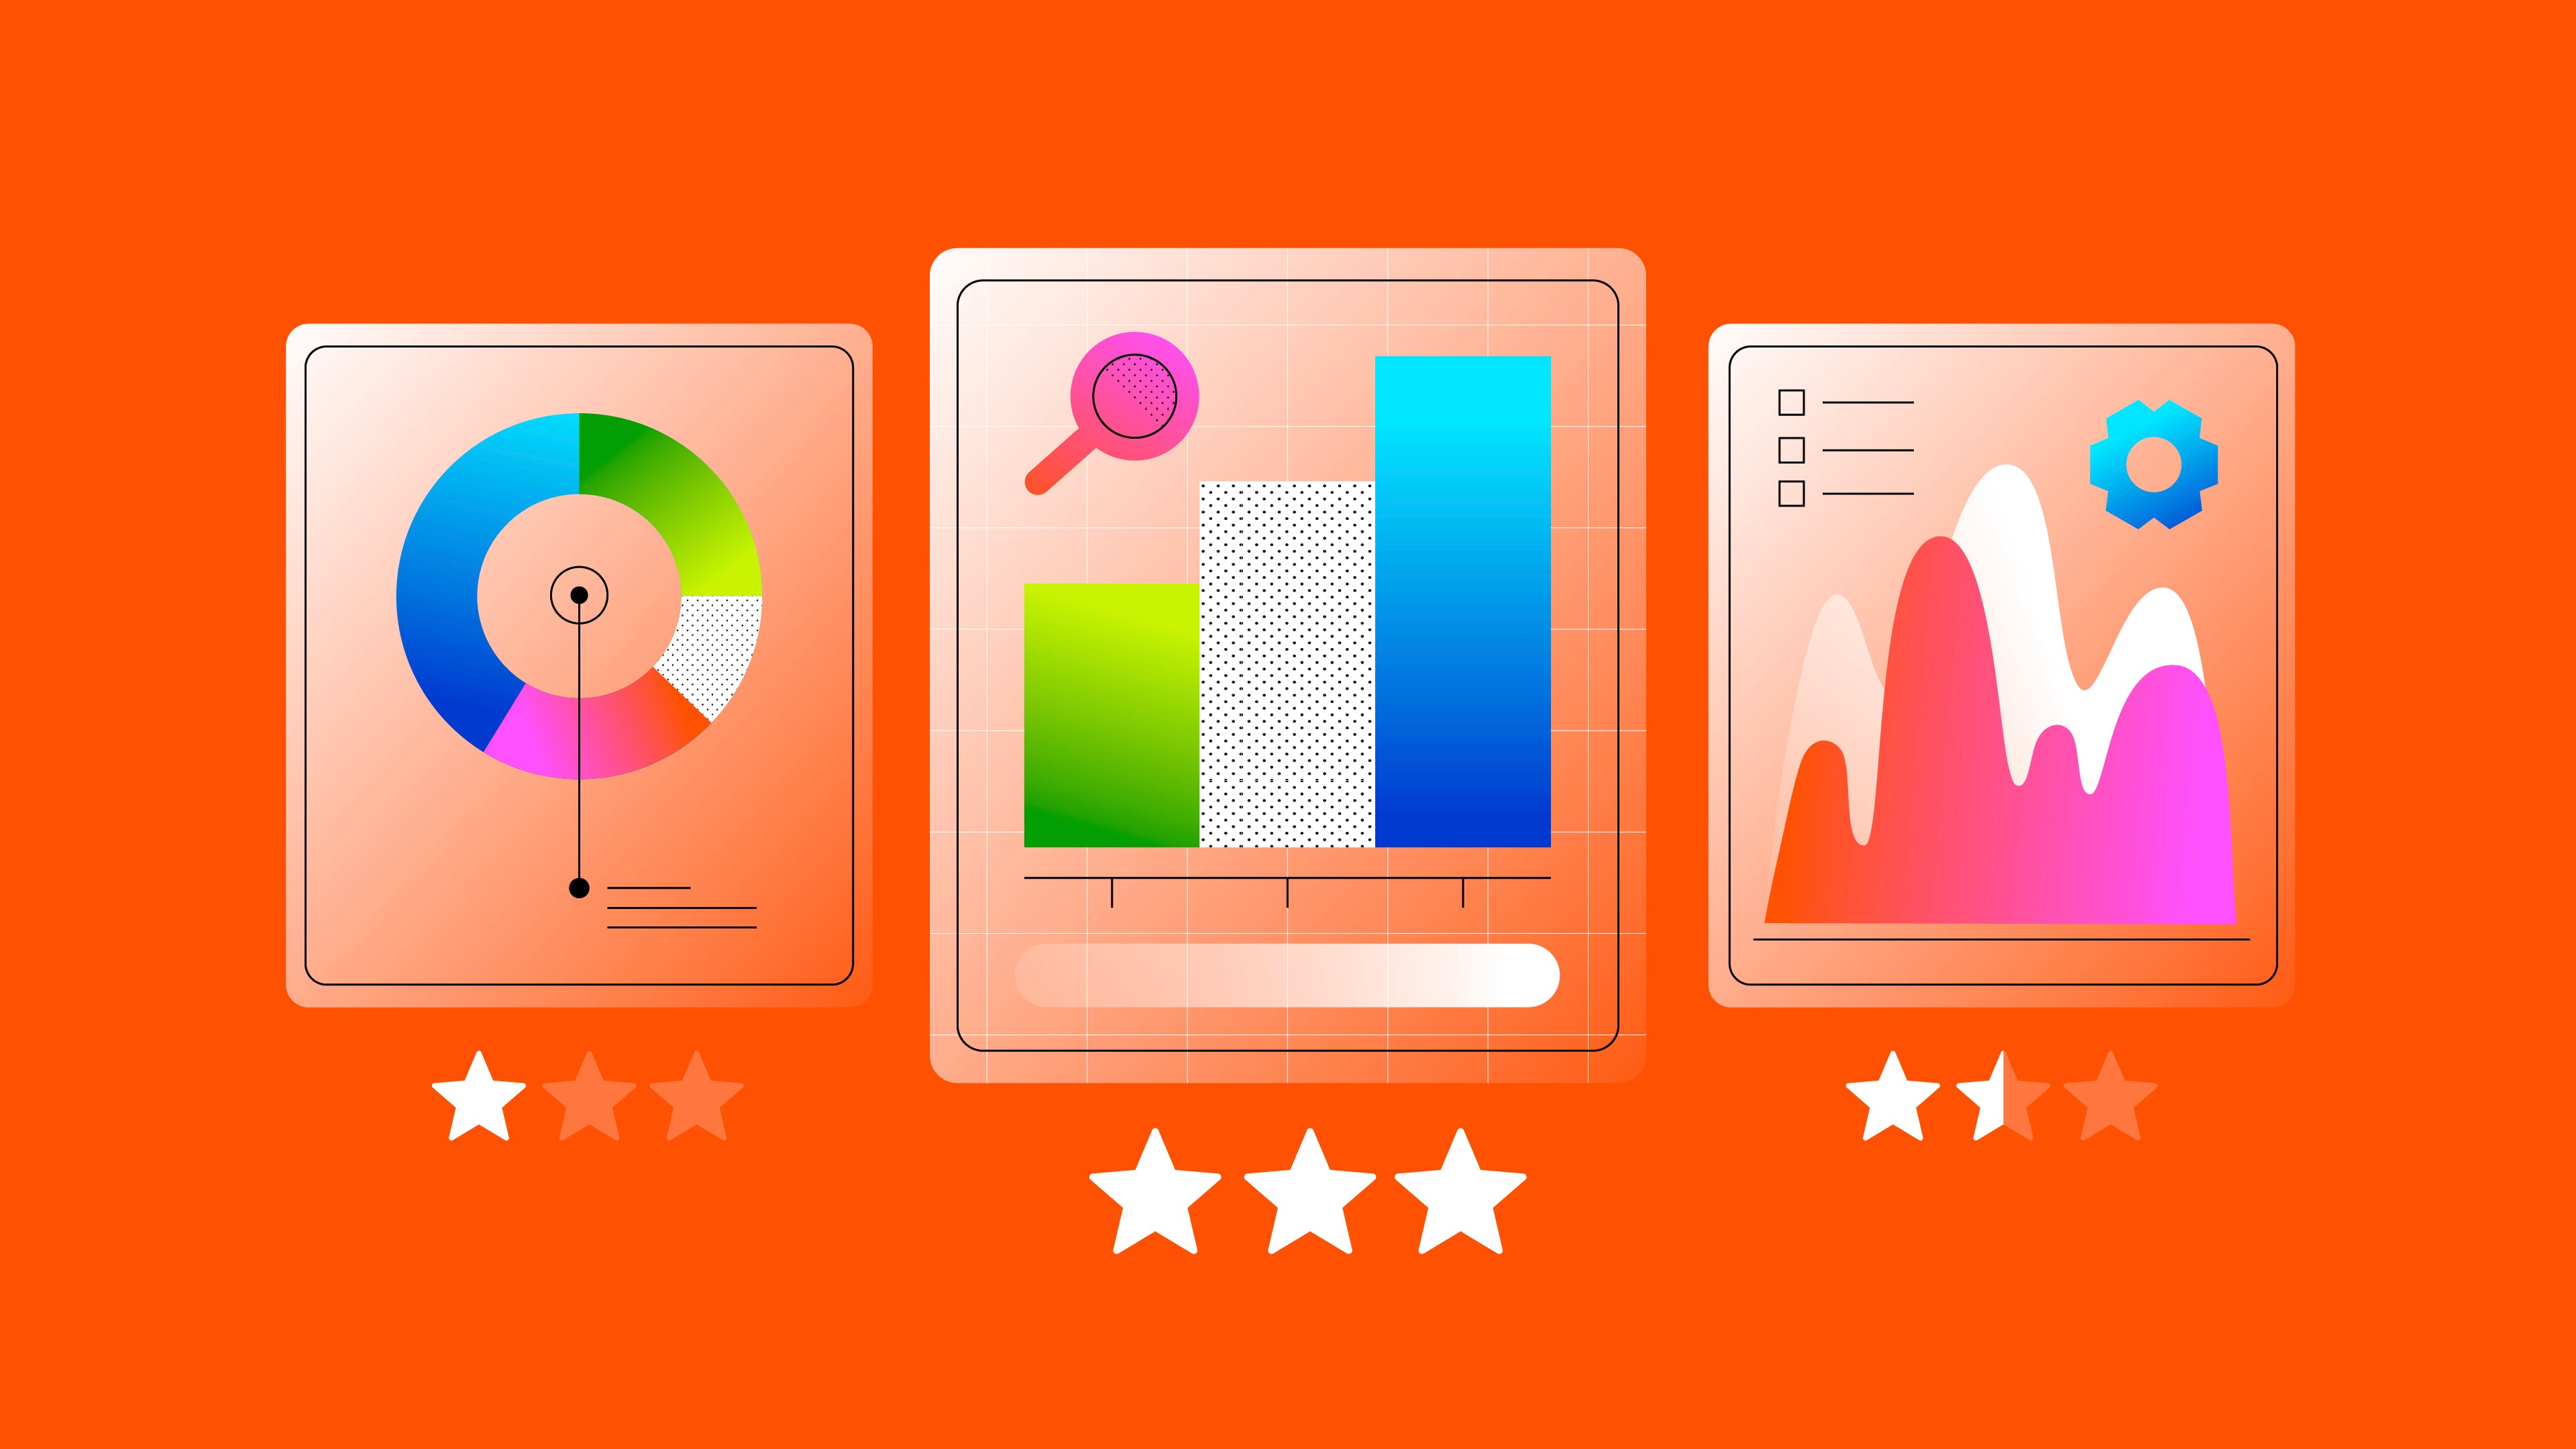 Three stylized data visualization panels on an orange background, featuring charts in modern graphic design.